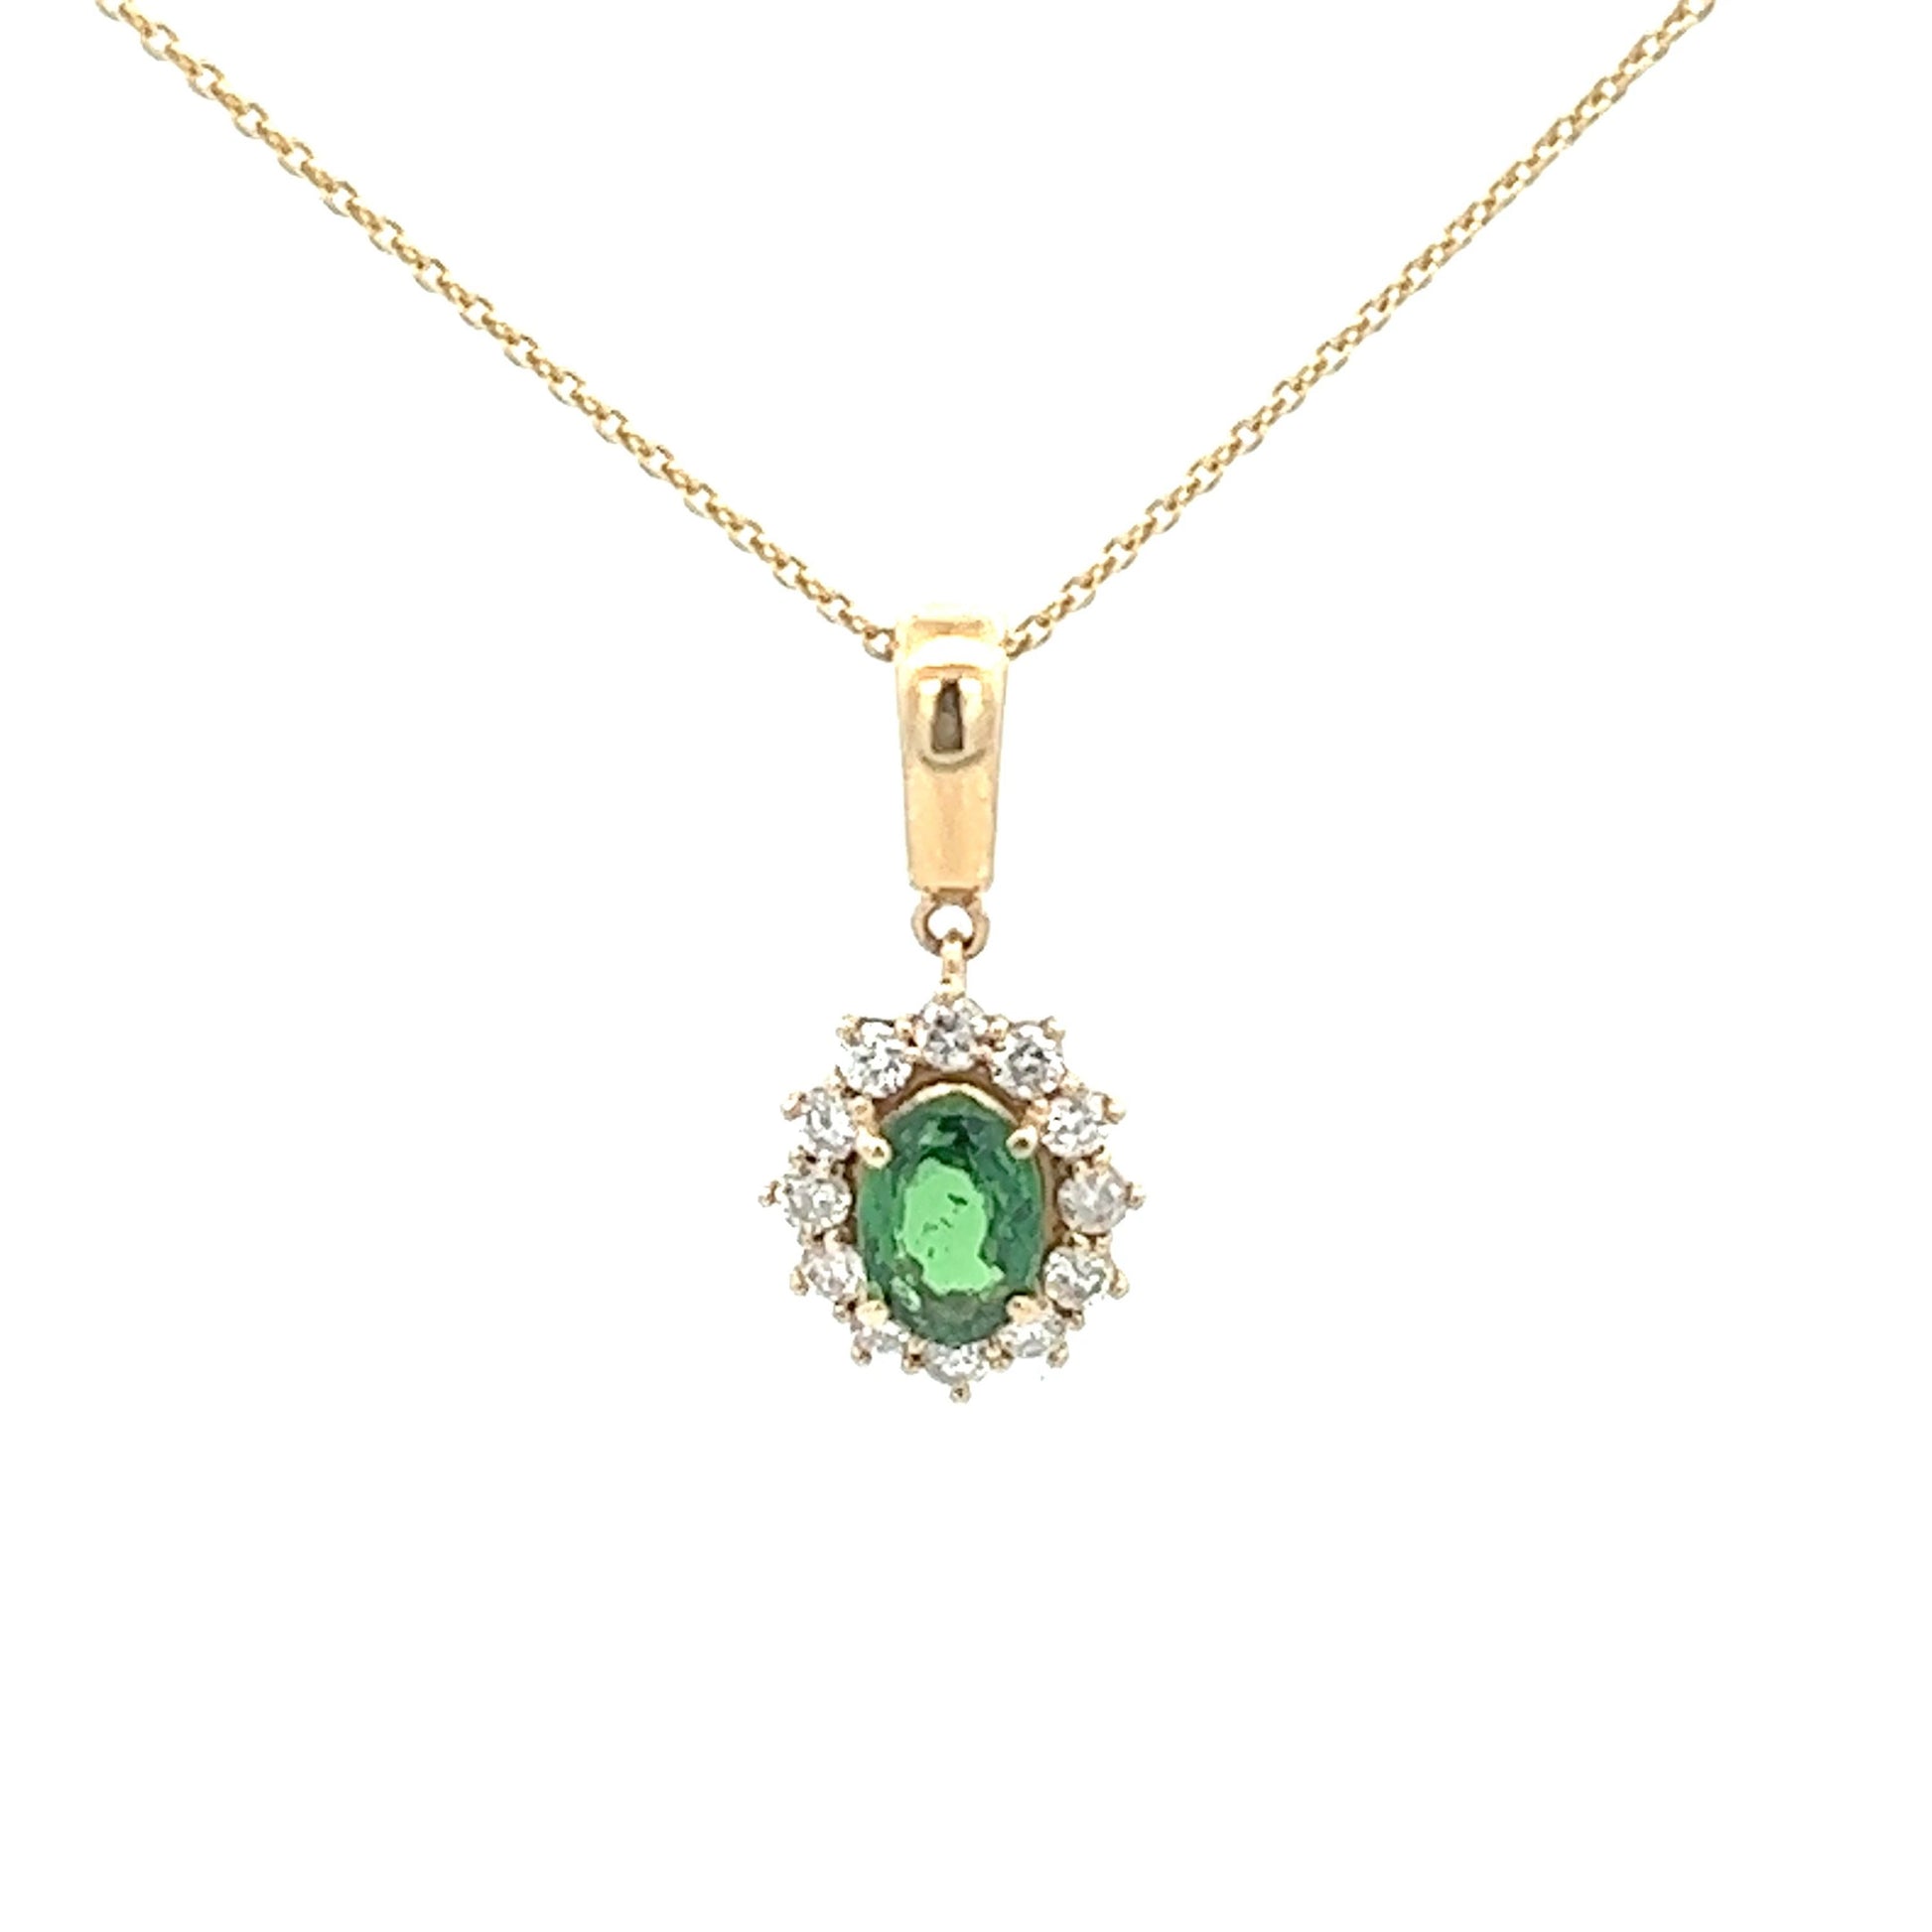 1.25cttw Emerald And Diamond Necklace 14k Gold Chain